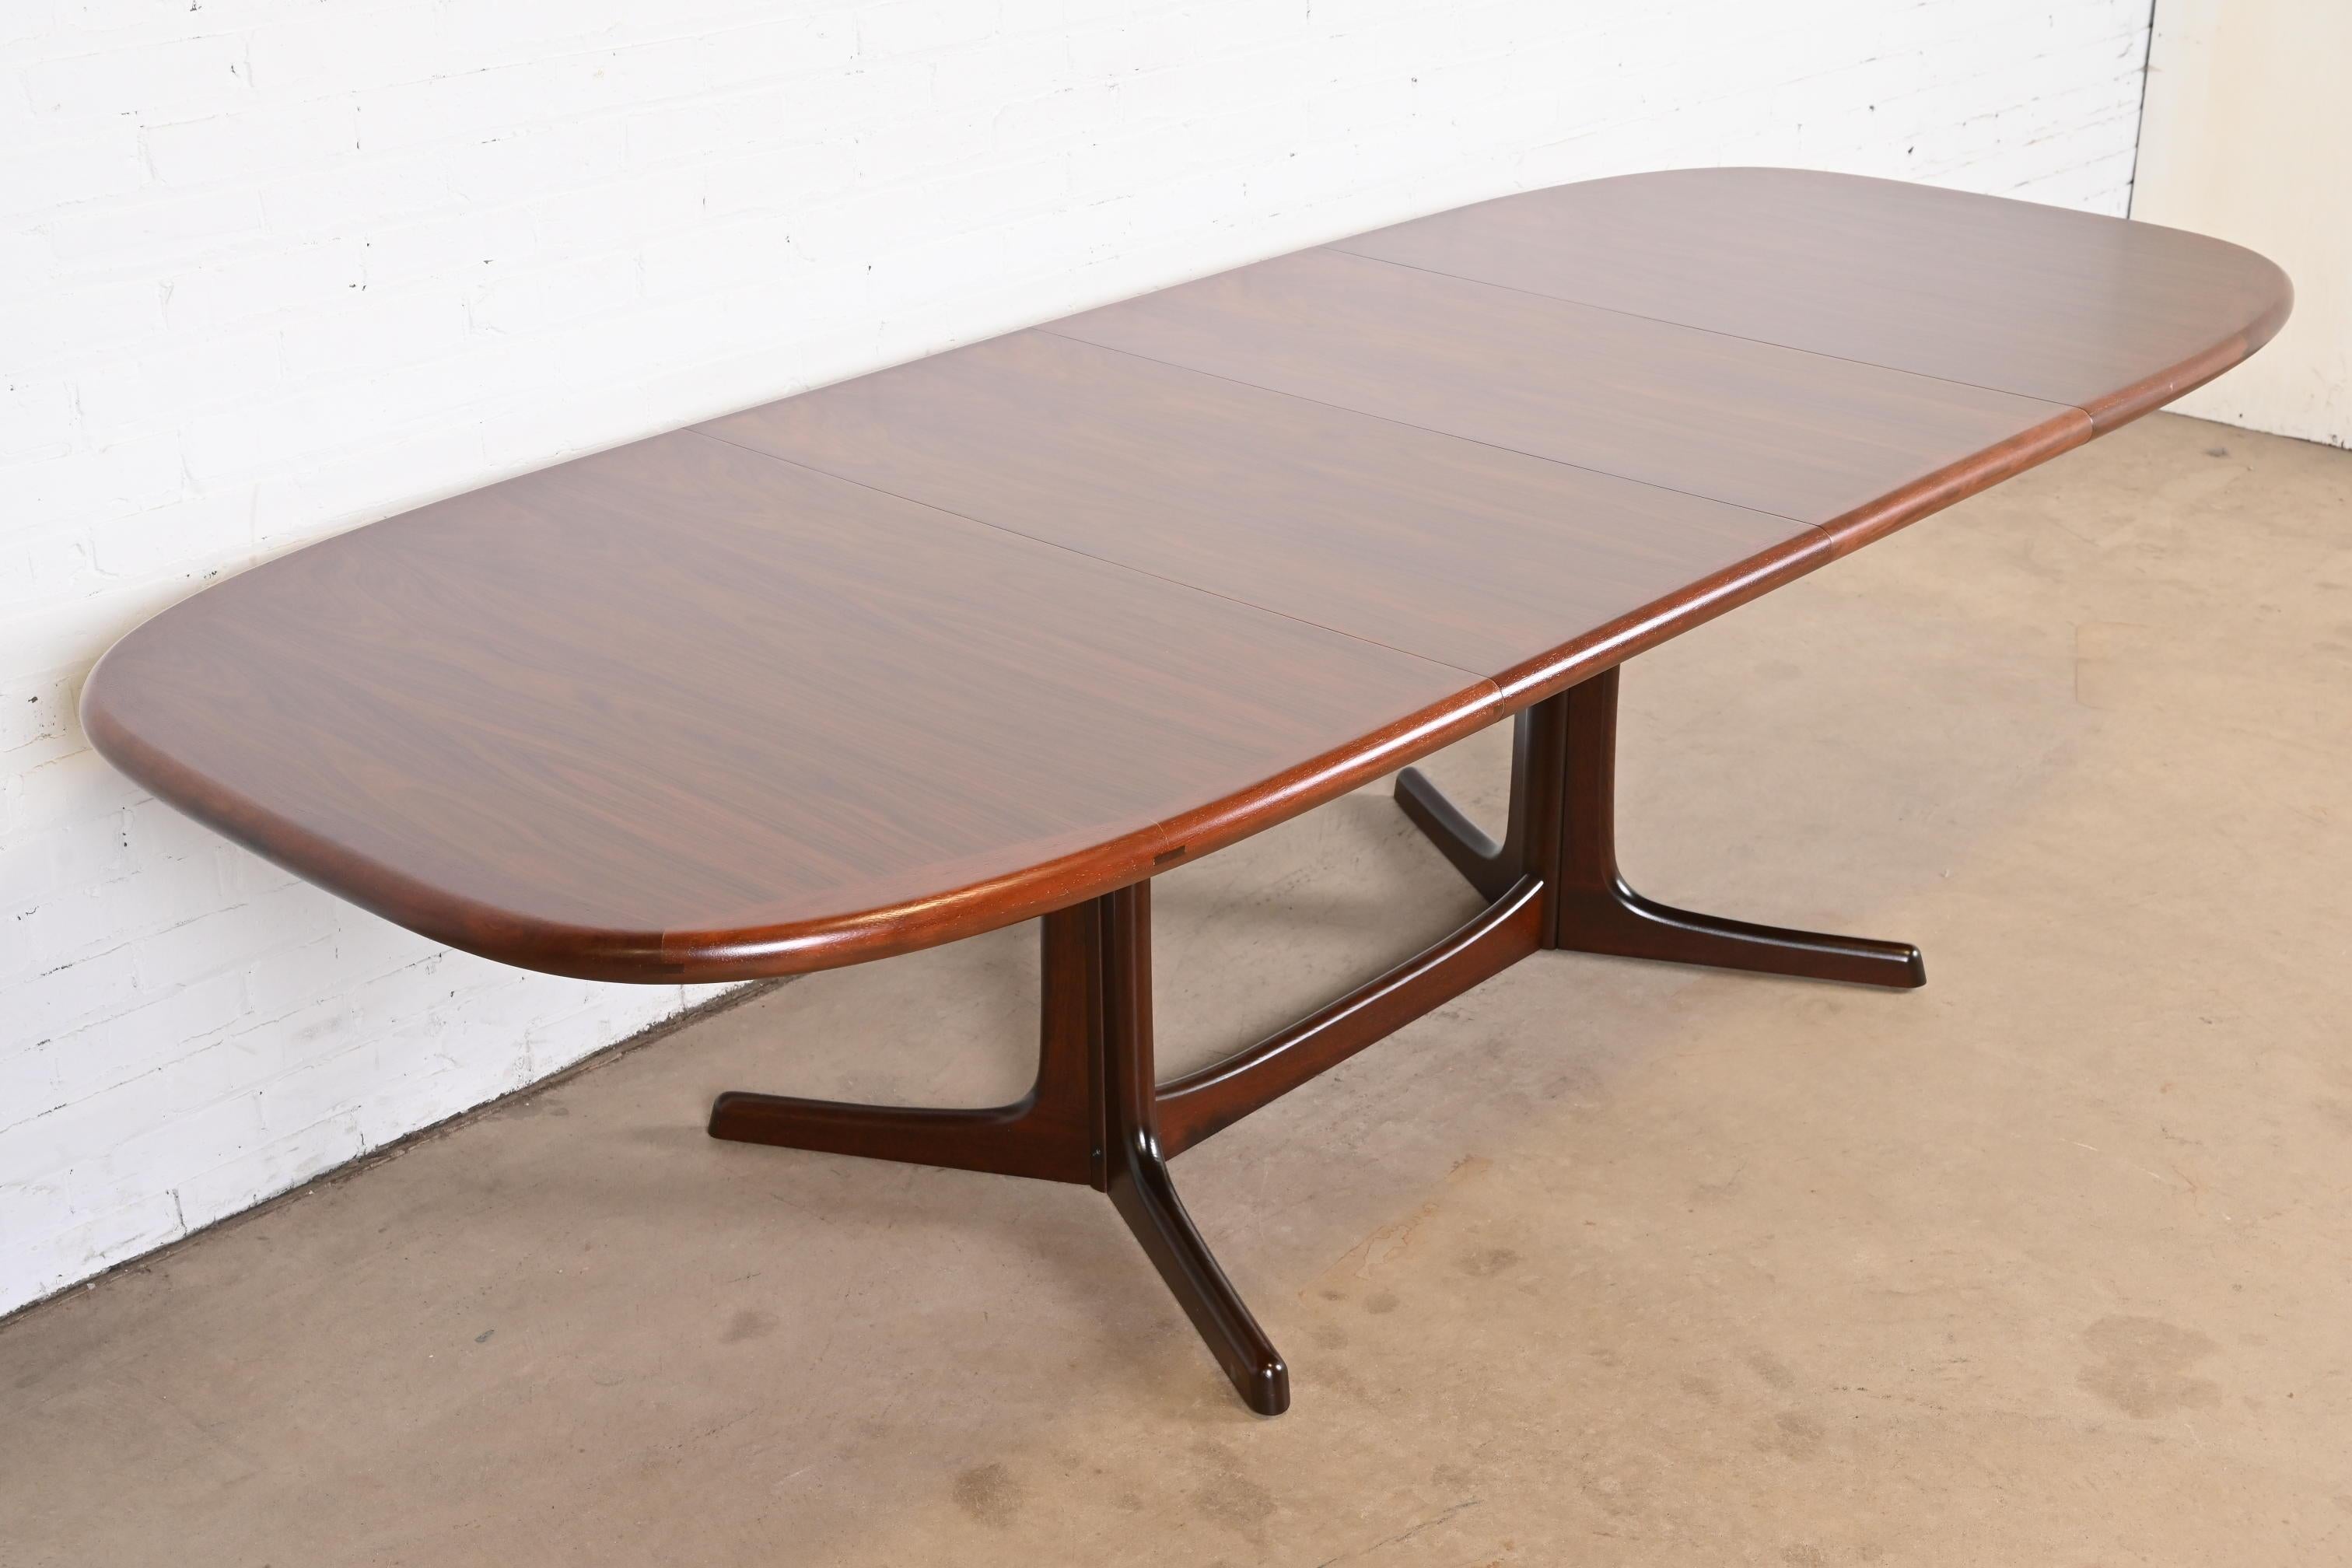 Mid-20th Century Dyrlund Danish Modern Rosewood Pedestal Extension Dining Table, Newly Refinished For Sale